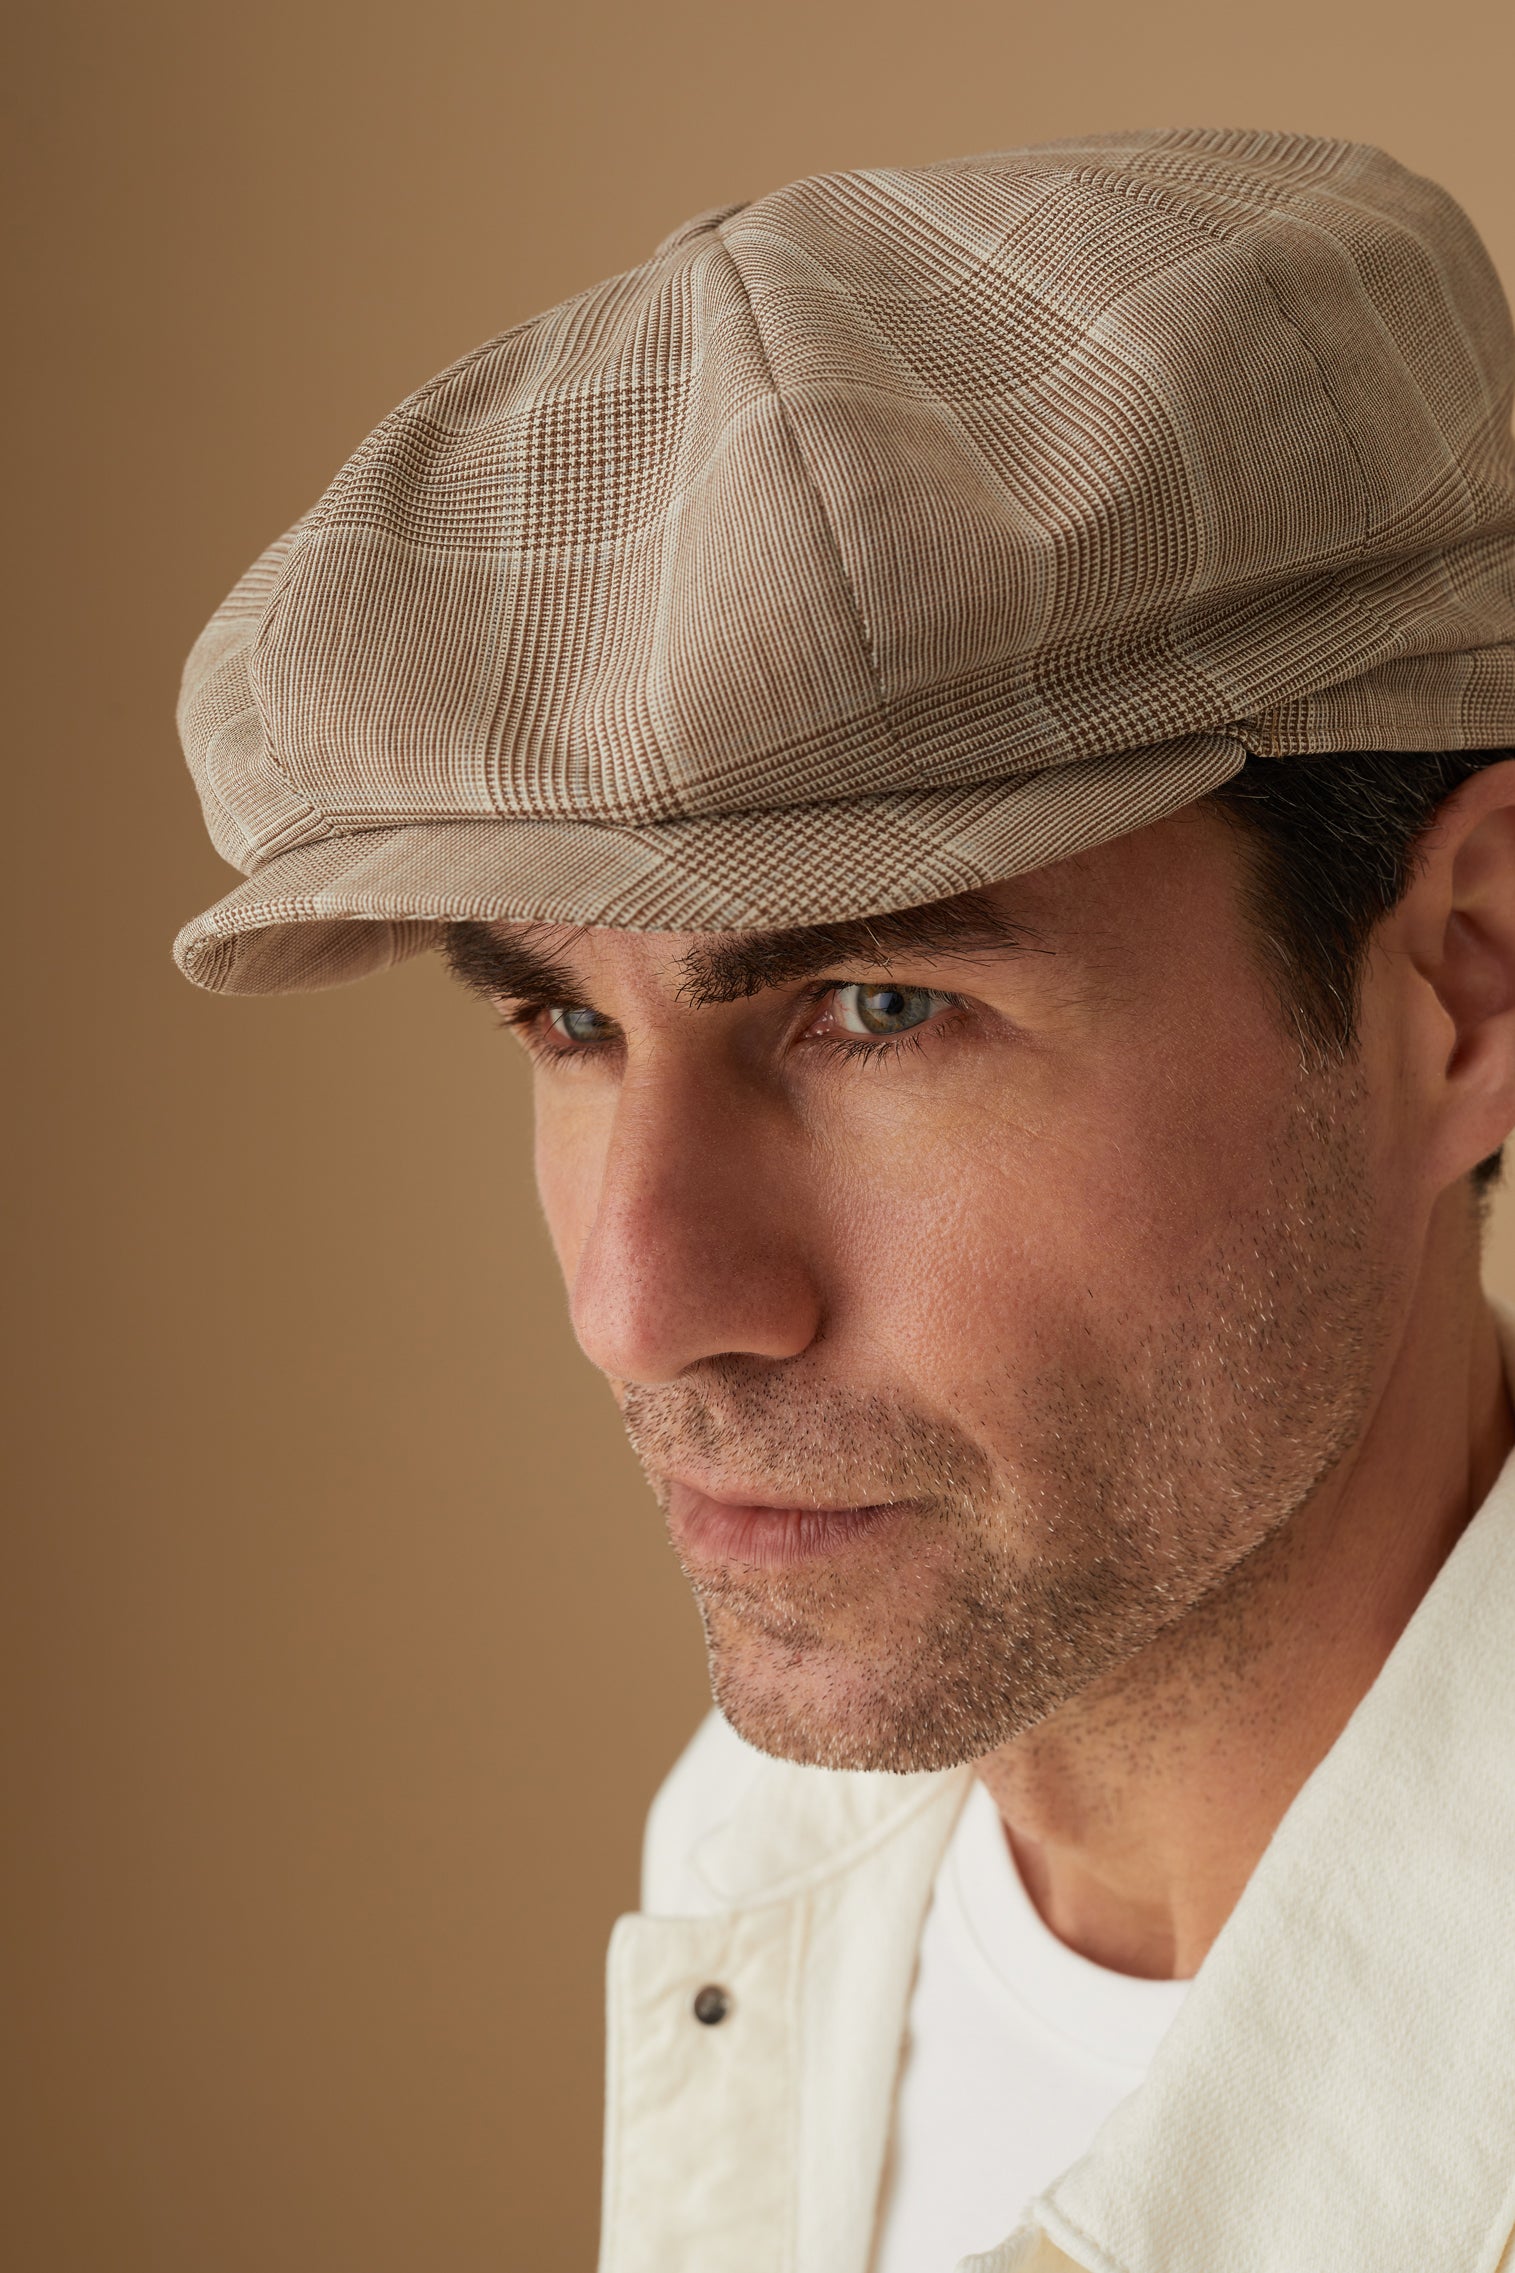 New Season Men's Hat Collection - Lock & Co. Hatters